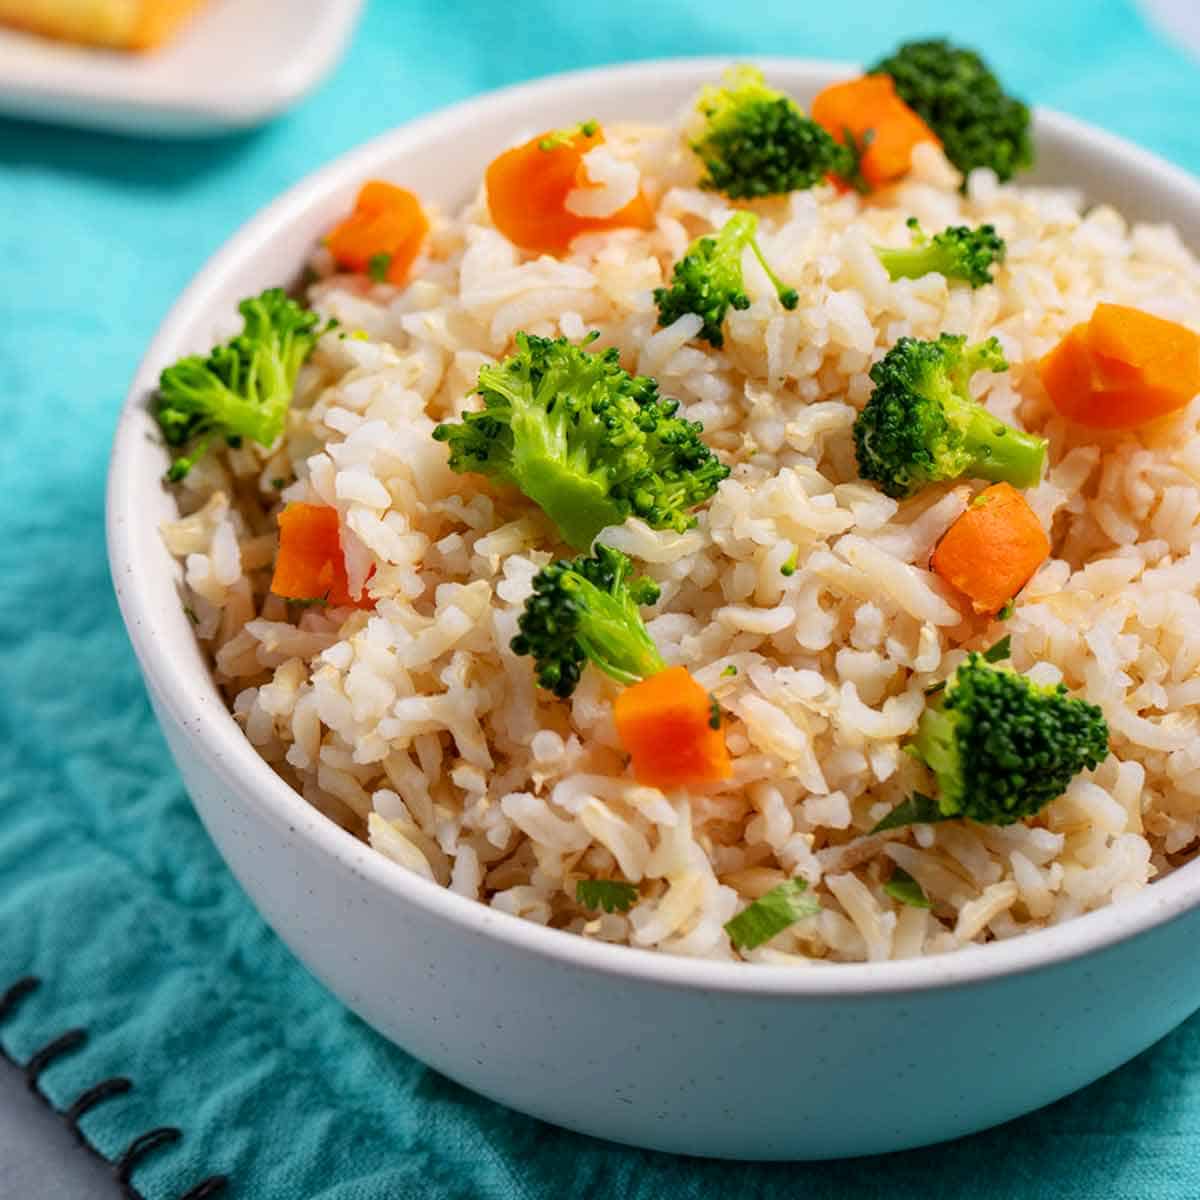 Bowl of brown rice and vegetables.